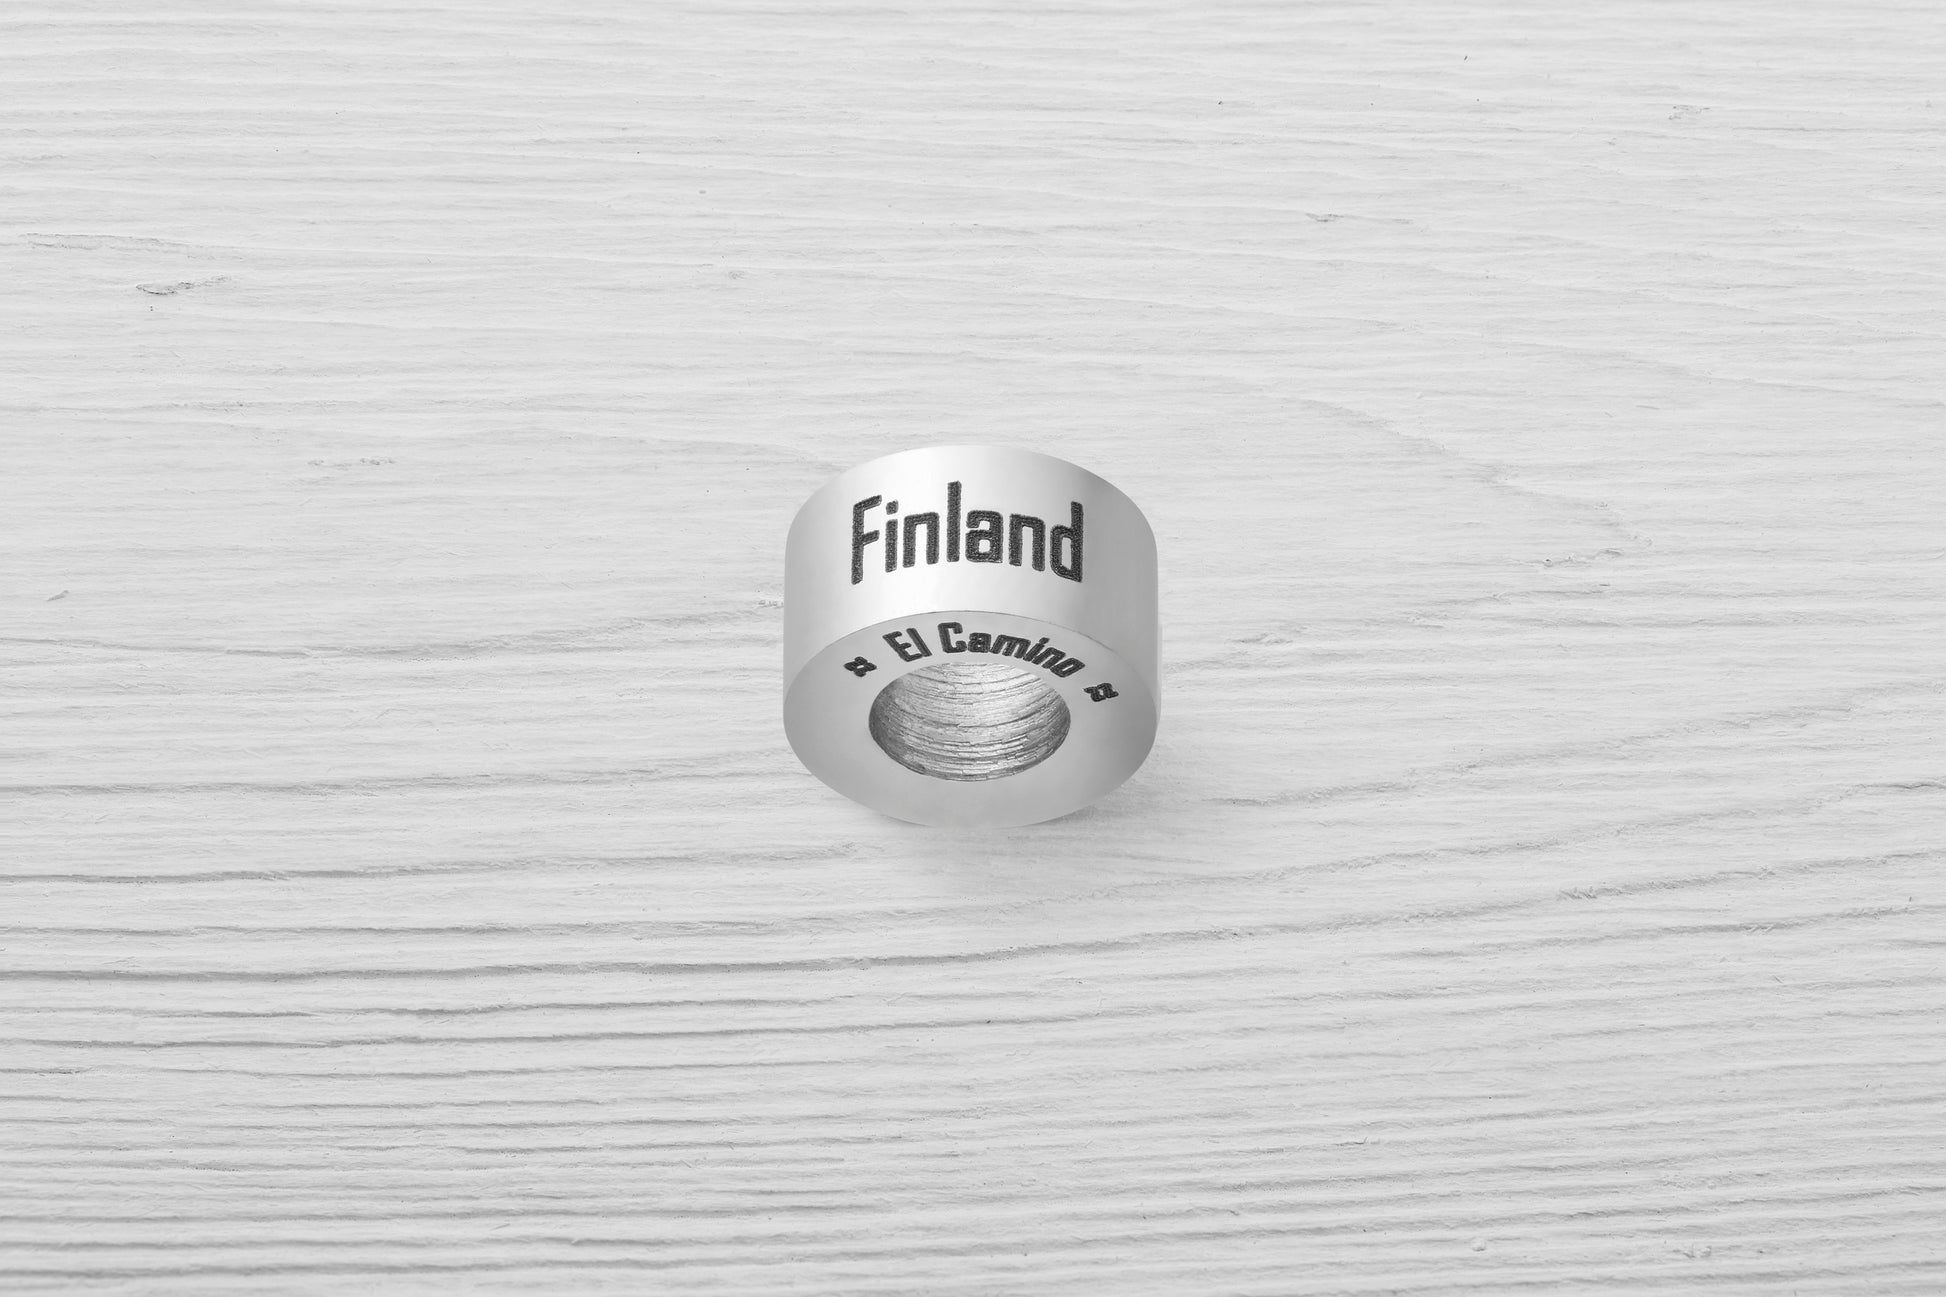 El Camino Finland Country Step Travel Charm Bead